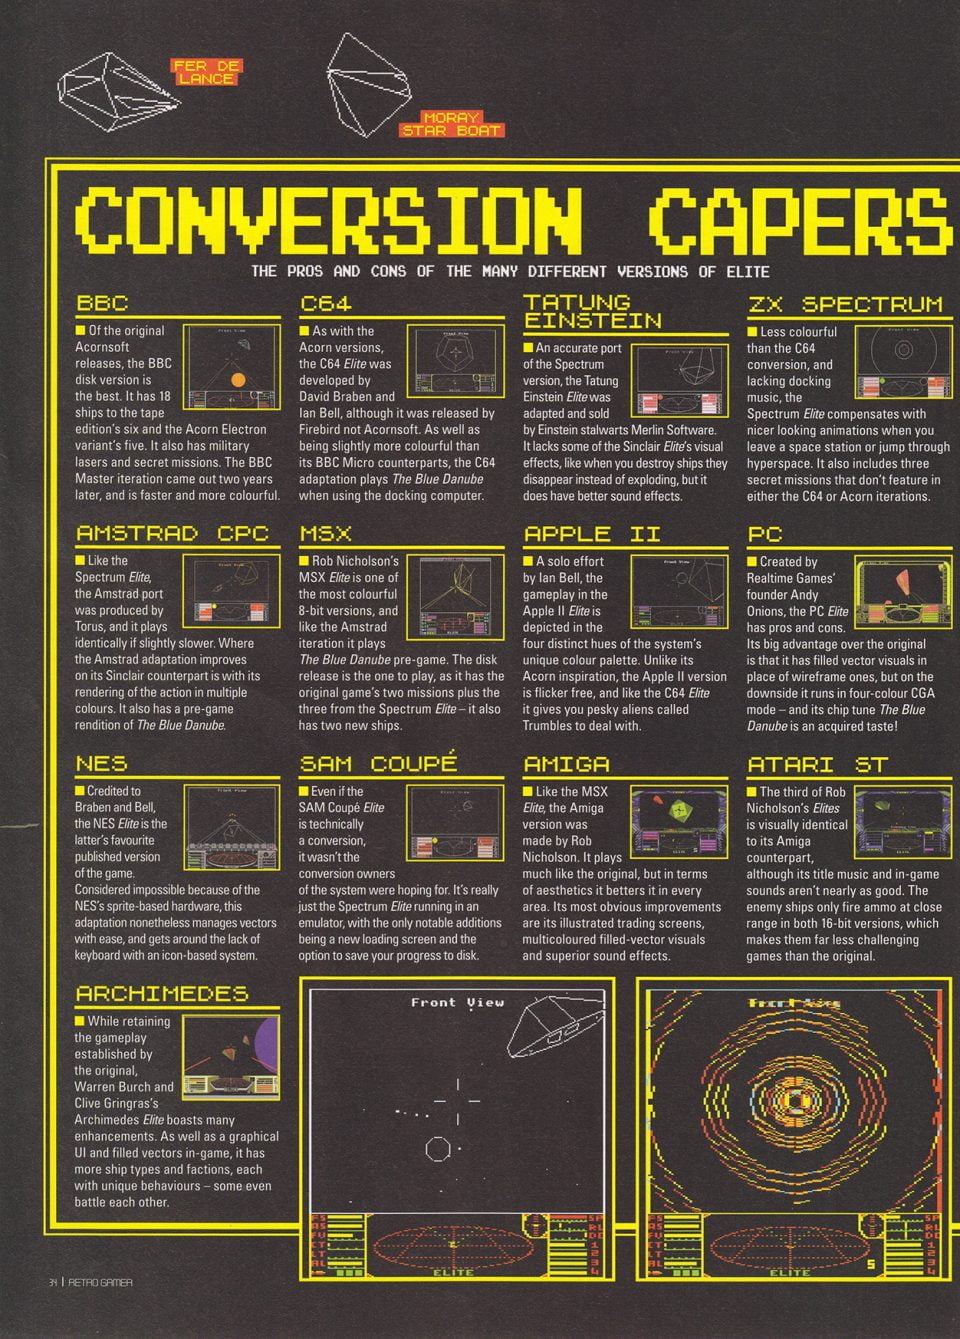 Elite conversion interview in Retro Gamer, Aug 2022—interview with Ricardo Pinto